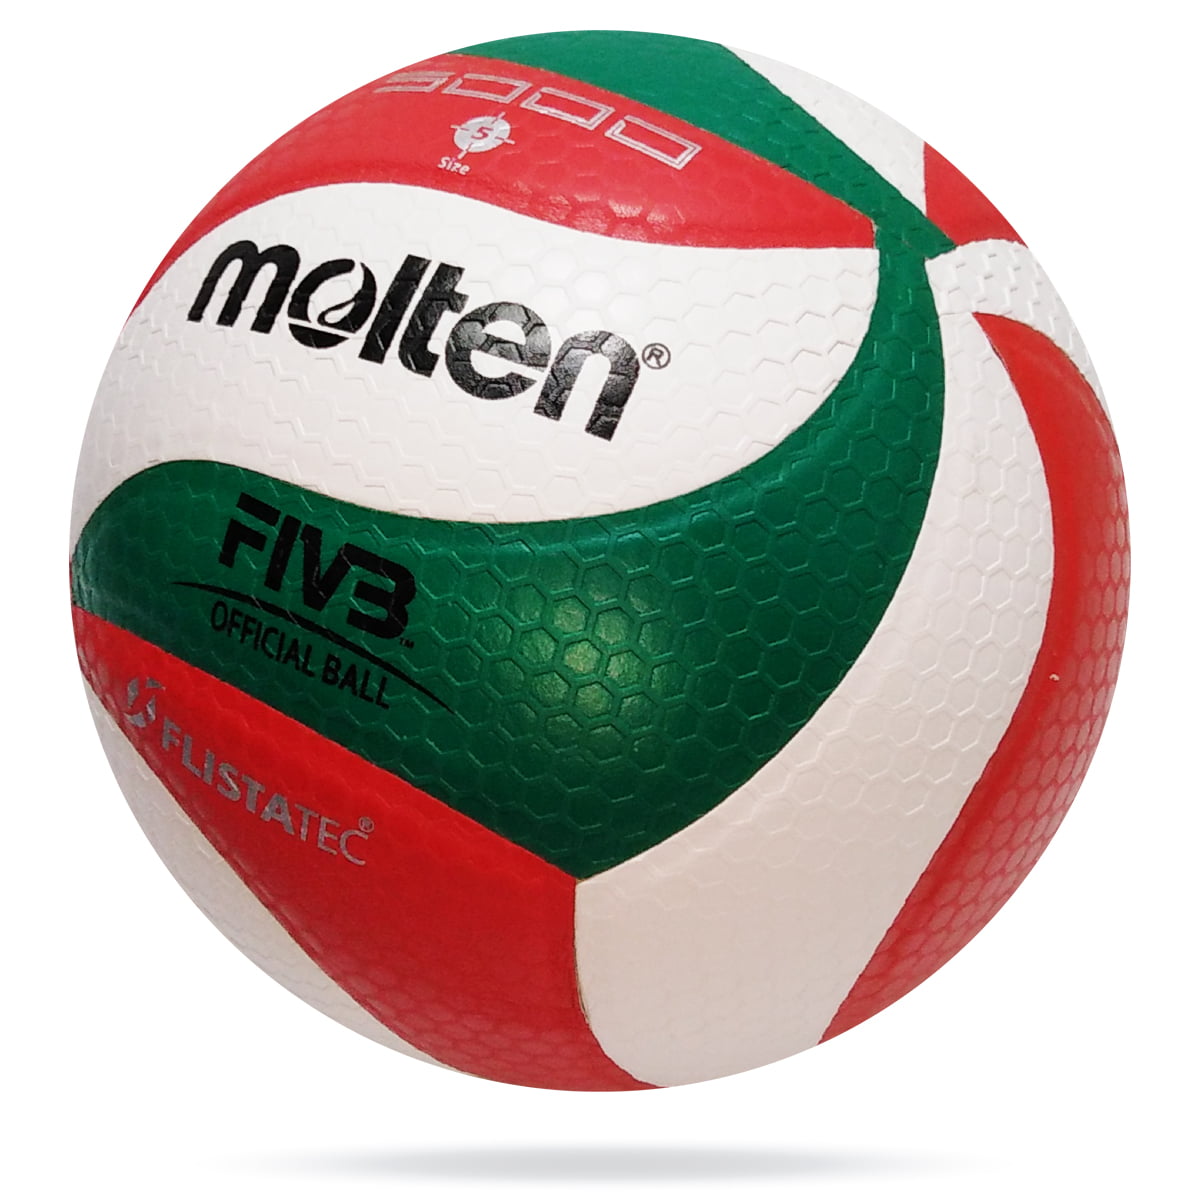 Details about   Molten V5M5000 Volleyball Ball Size5 Leather Soft Touch Indoor Outdoor Game 